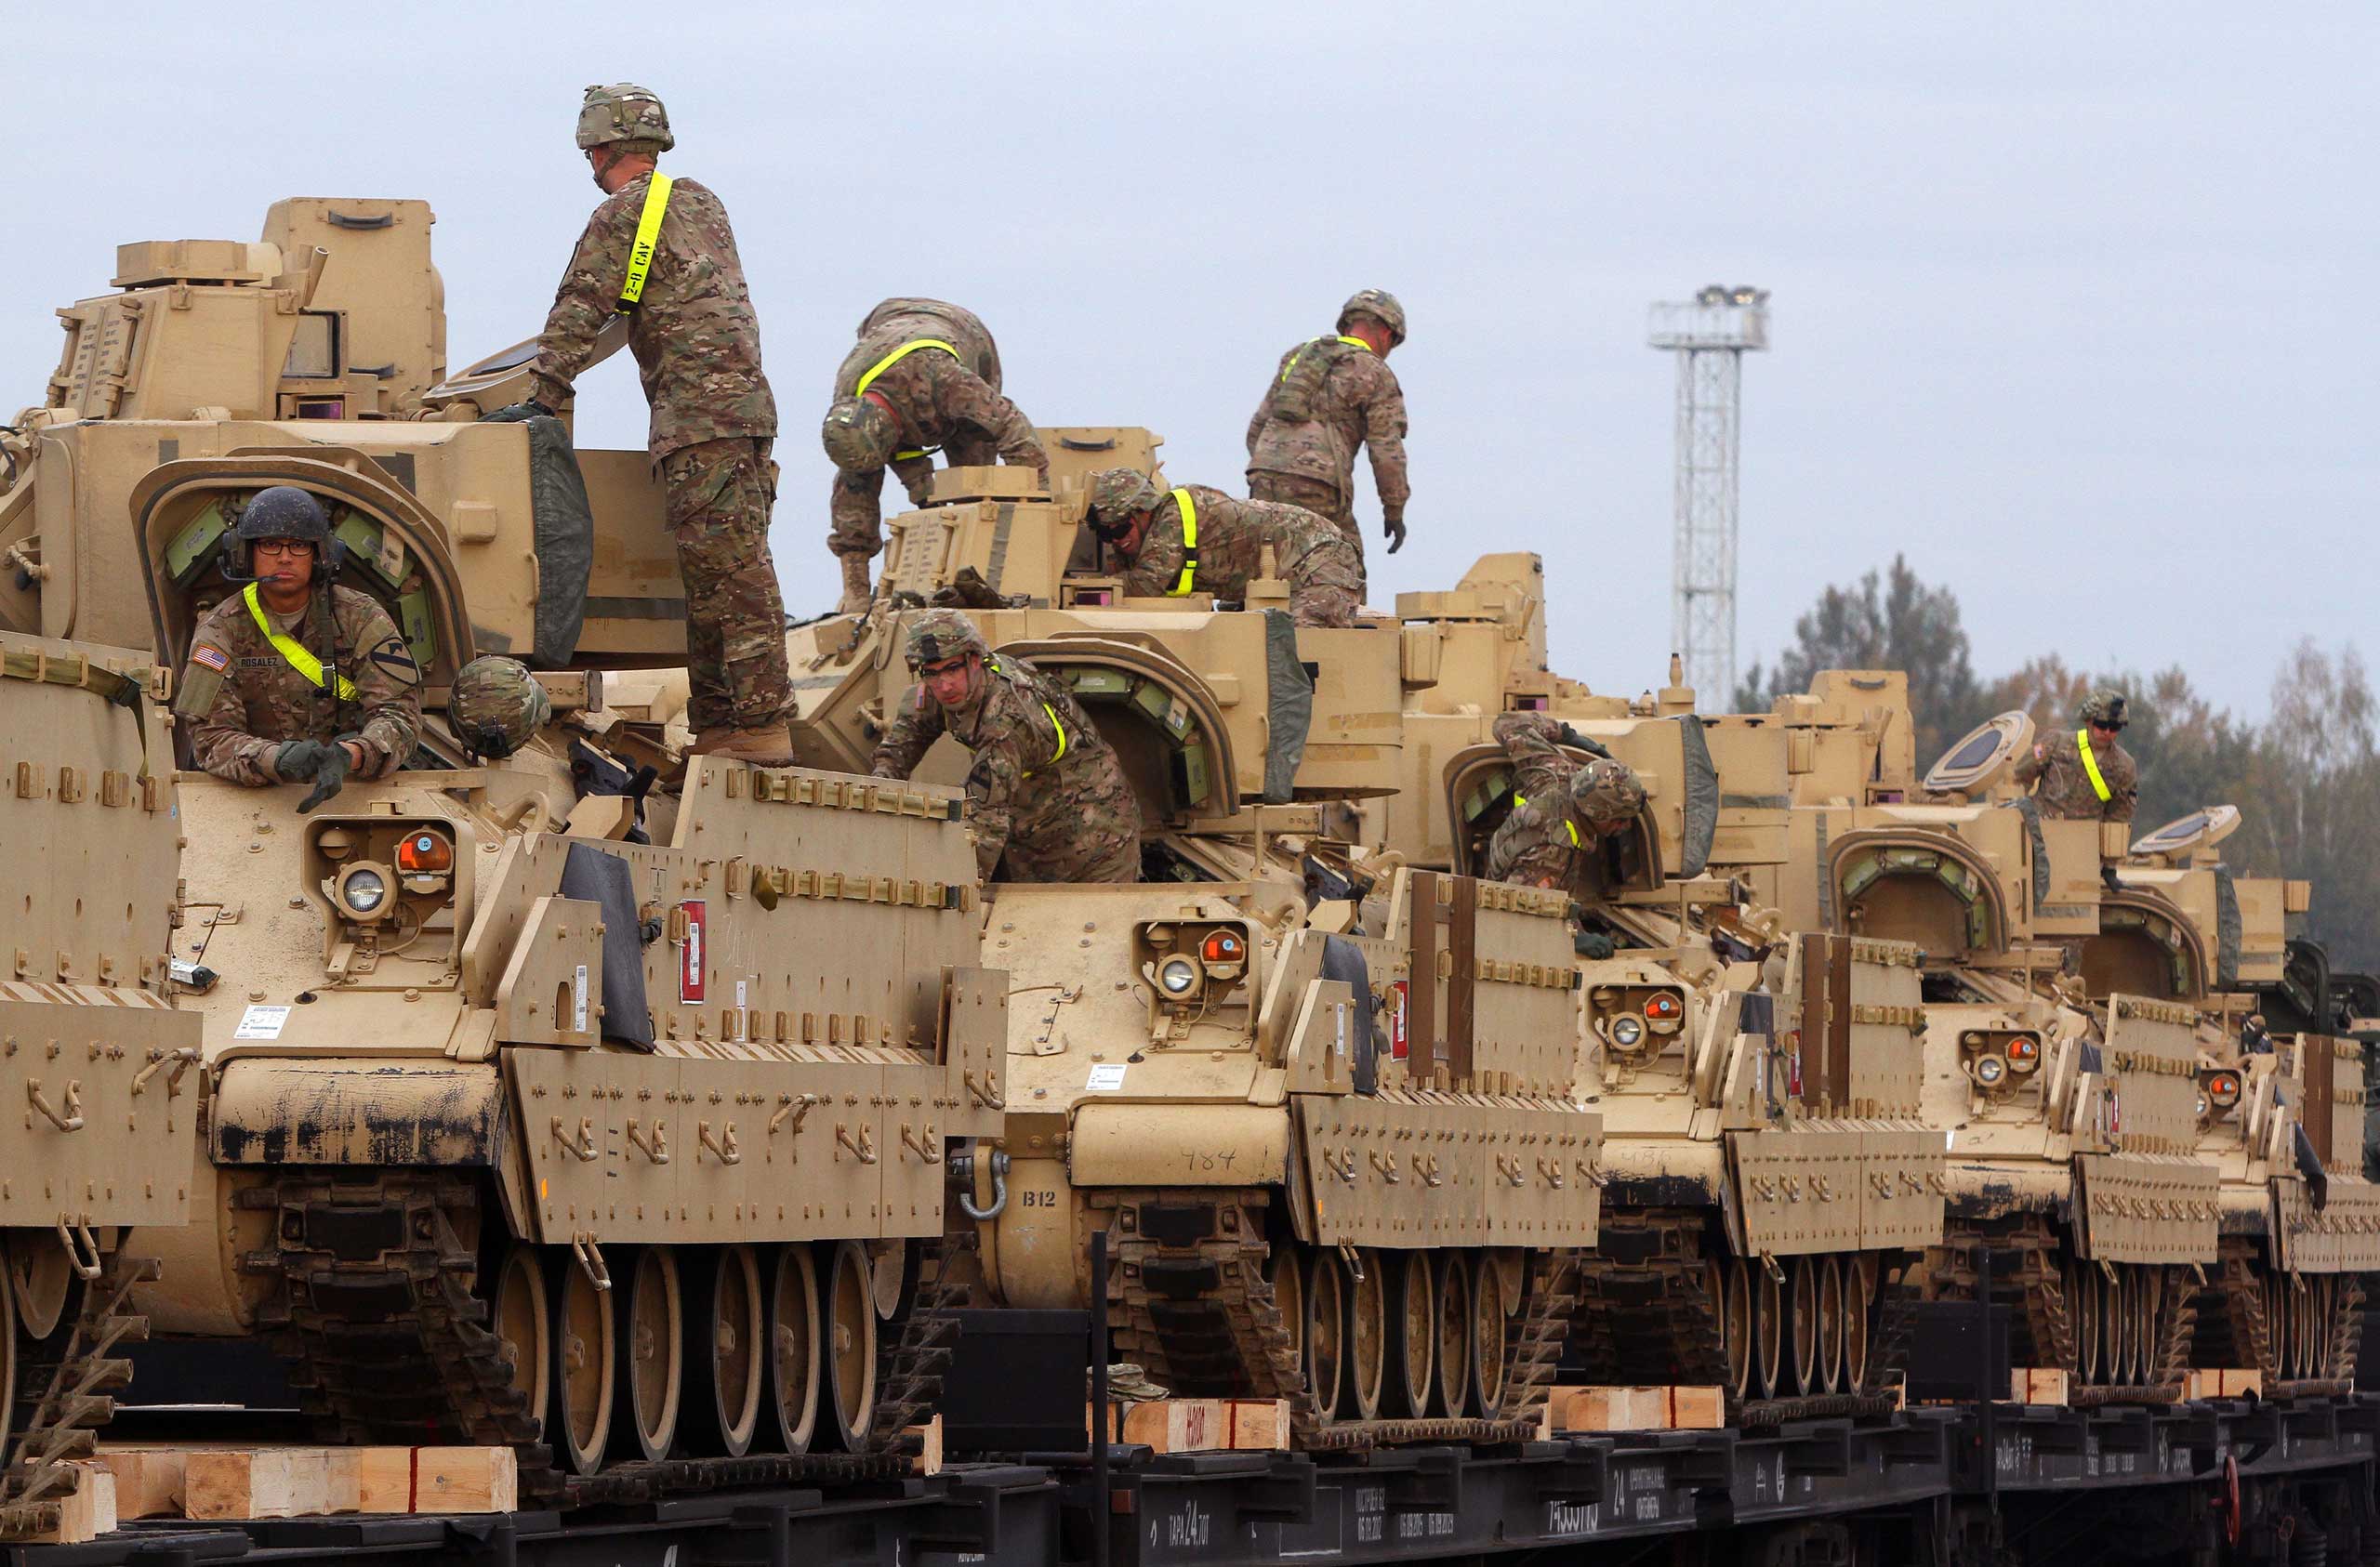 Members of the US Army 1st Brigade, 1st Cavalry Division, transport heavy combat equipment including Bradley Fighting Vehicles at the railway station near the Rukla military base in Lithuania, Oct. 4, 2014. (Petras Malukas—AFP/Getty Images)